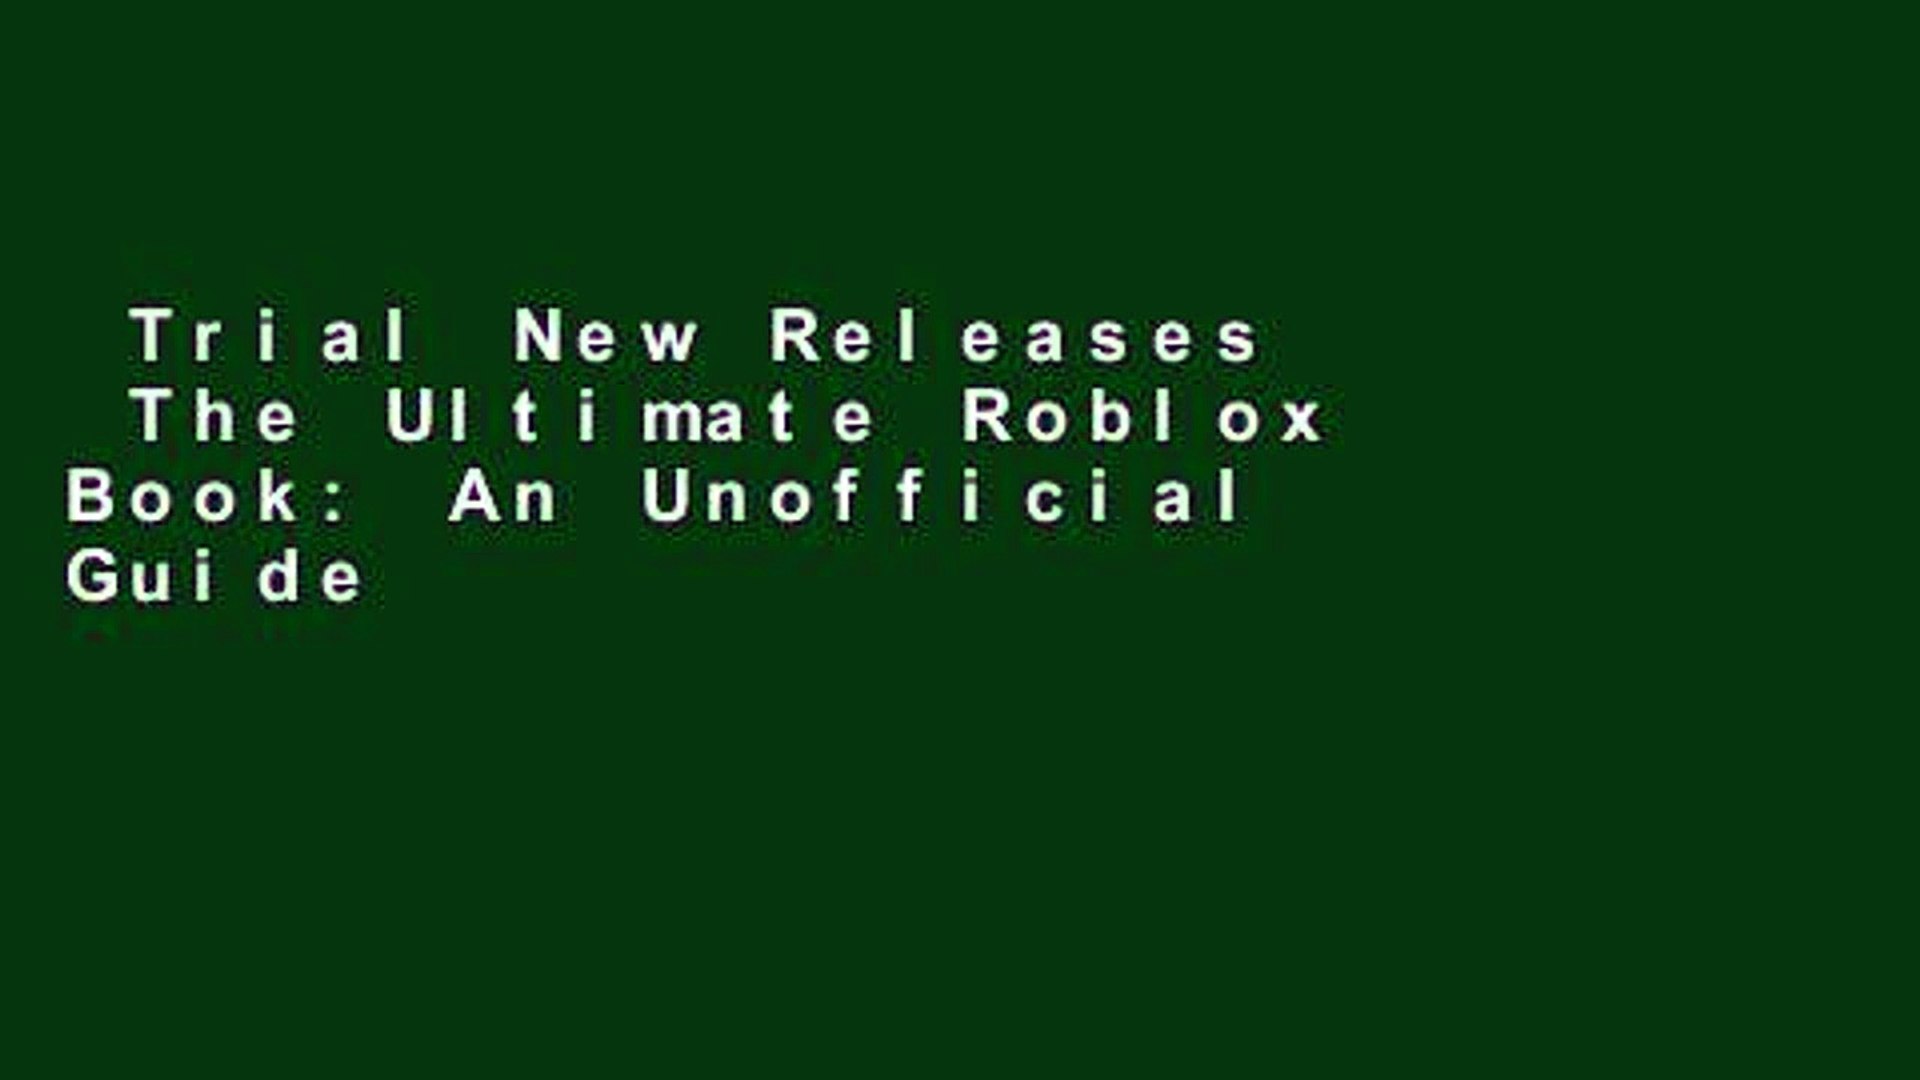 Trial New Releases The Ultimate Roblox Book An Unofficial Guide Learn How To Build Your Own Video Dailymotion - ultimate roblox book an unofficial guide